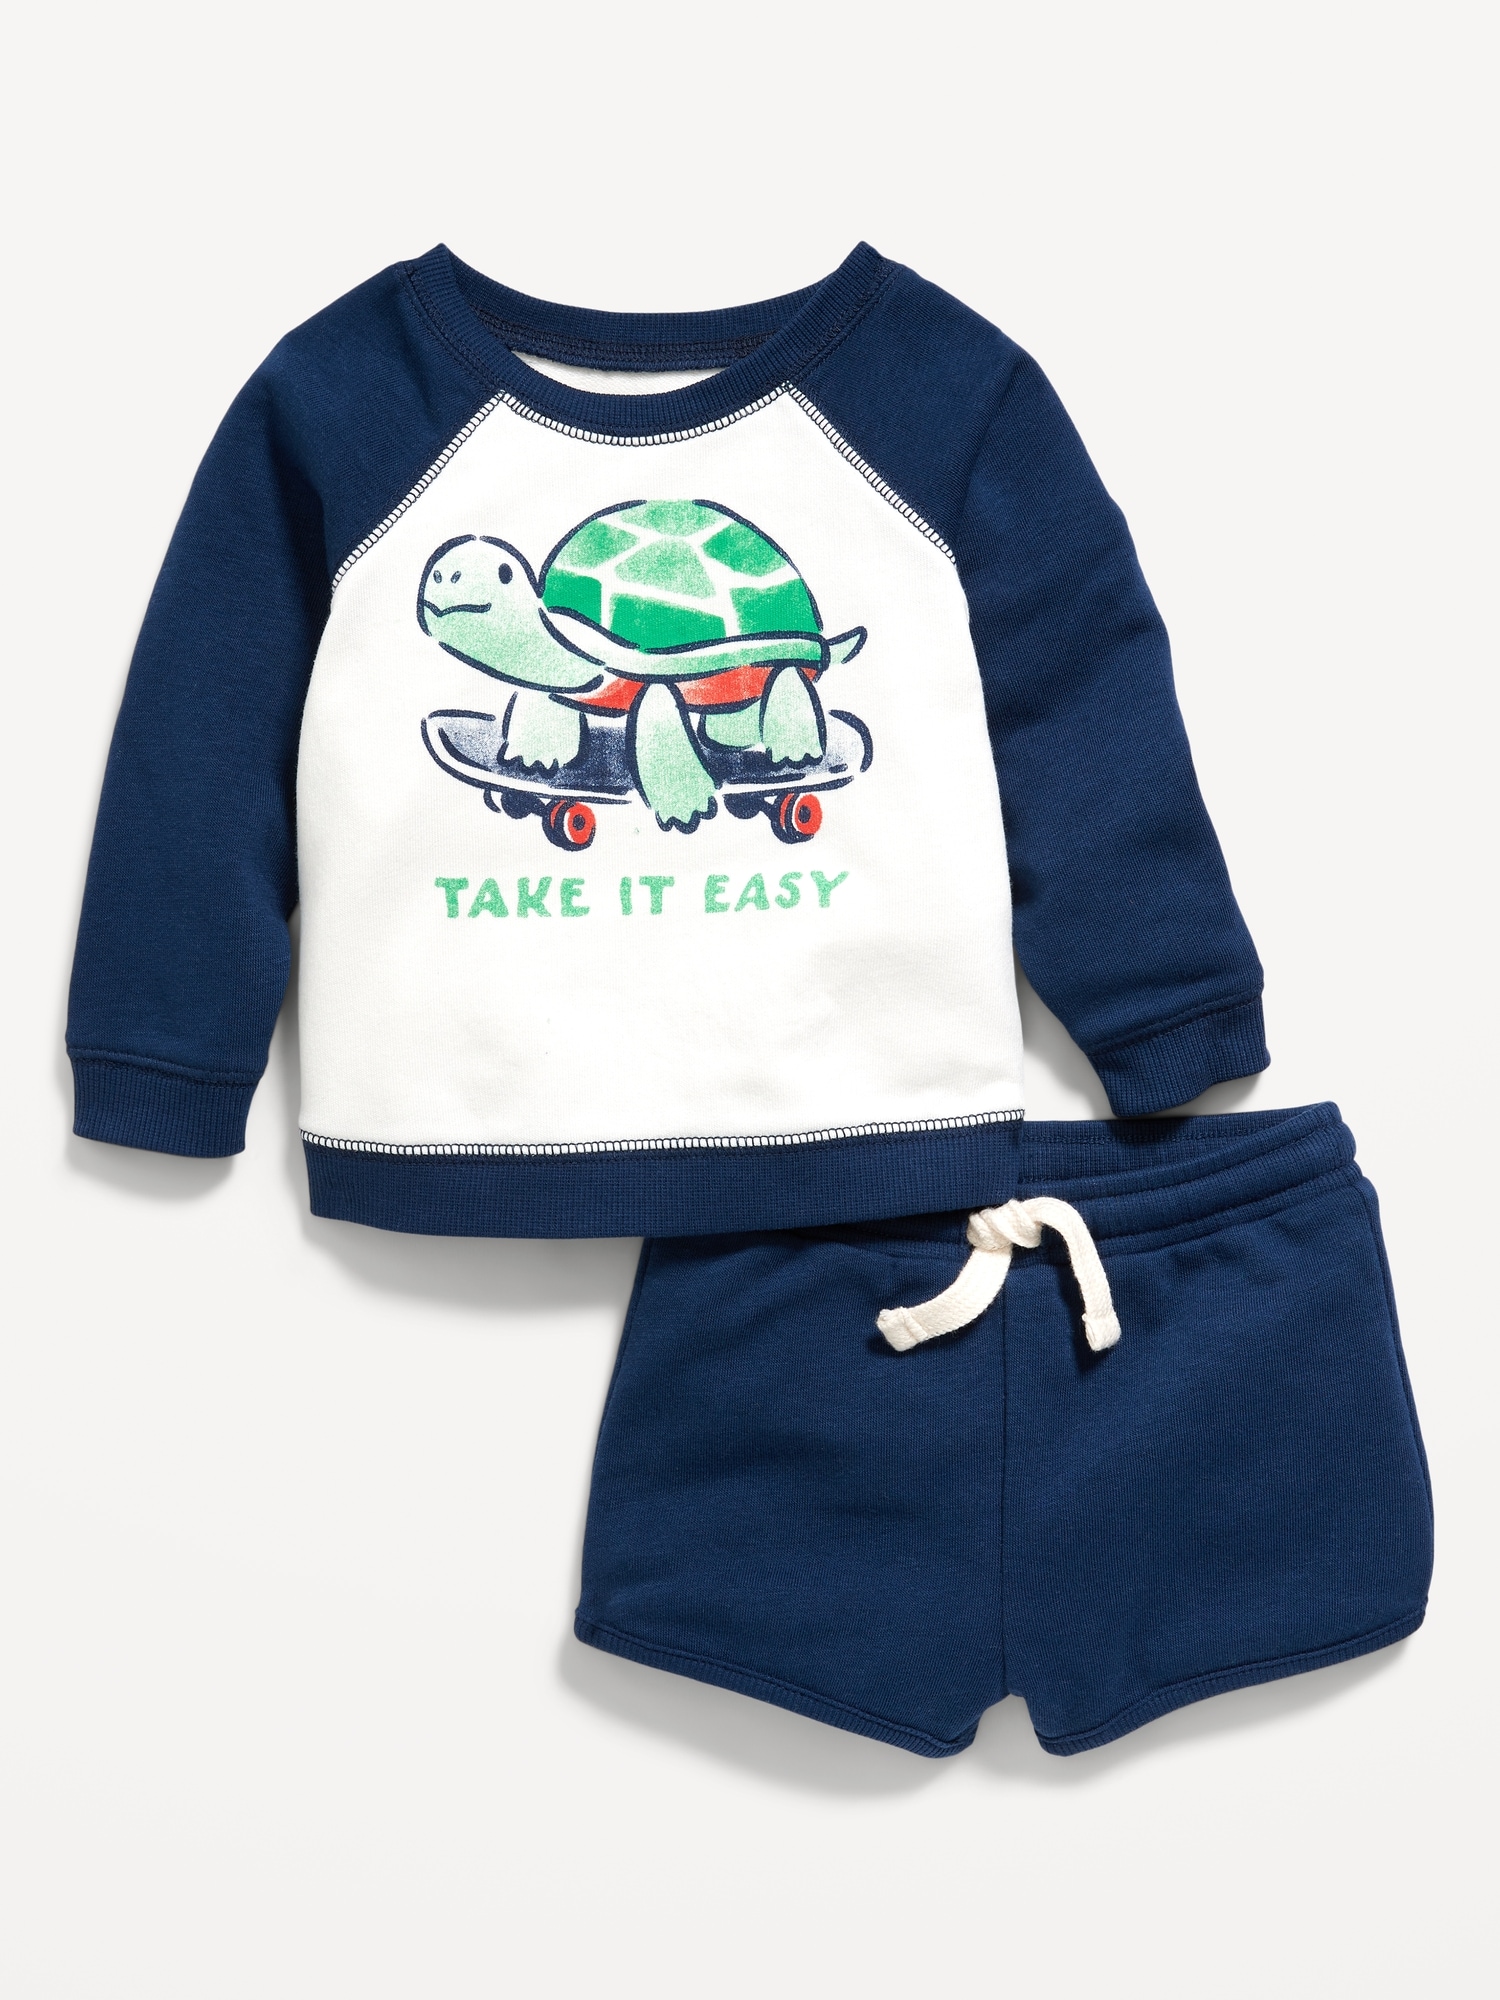 Crew-Neck Graphic Sweatshirt and Shorts Set for Baby Hot Deal